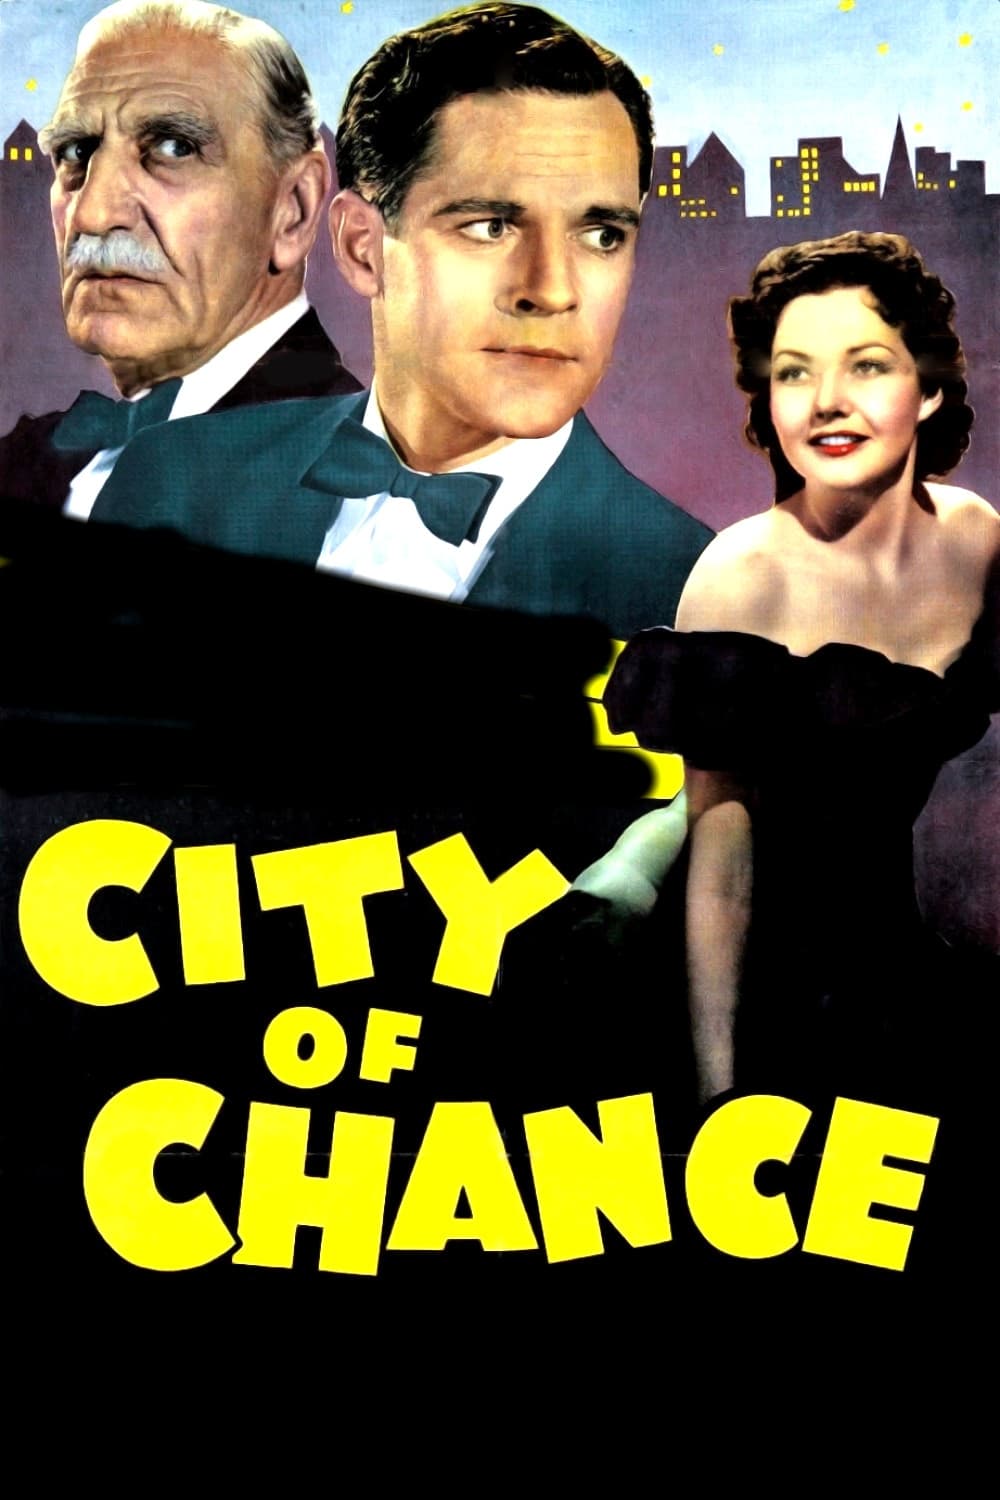 City of Chance (1940)